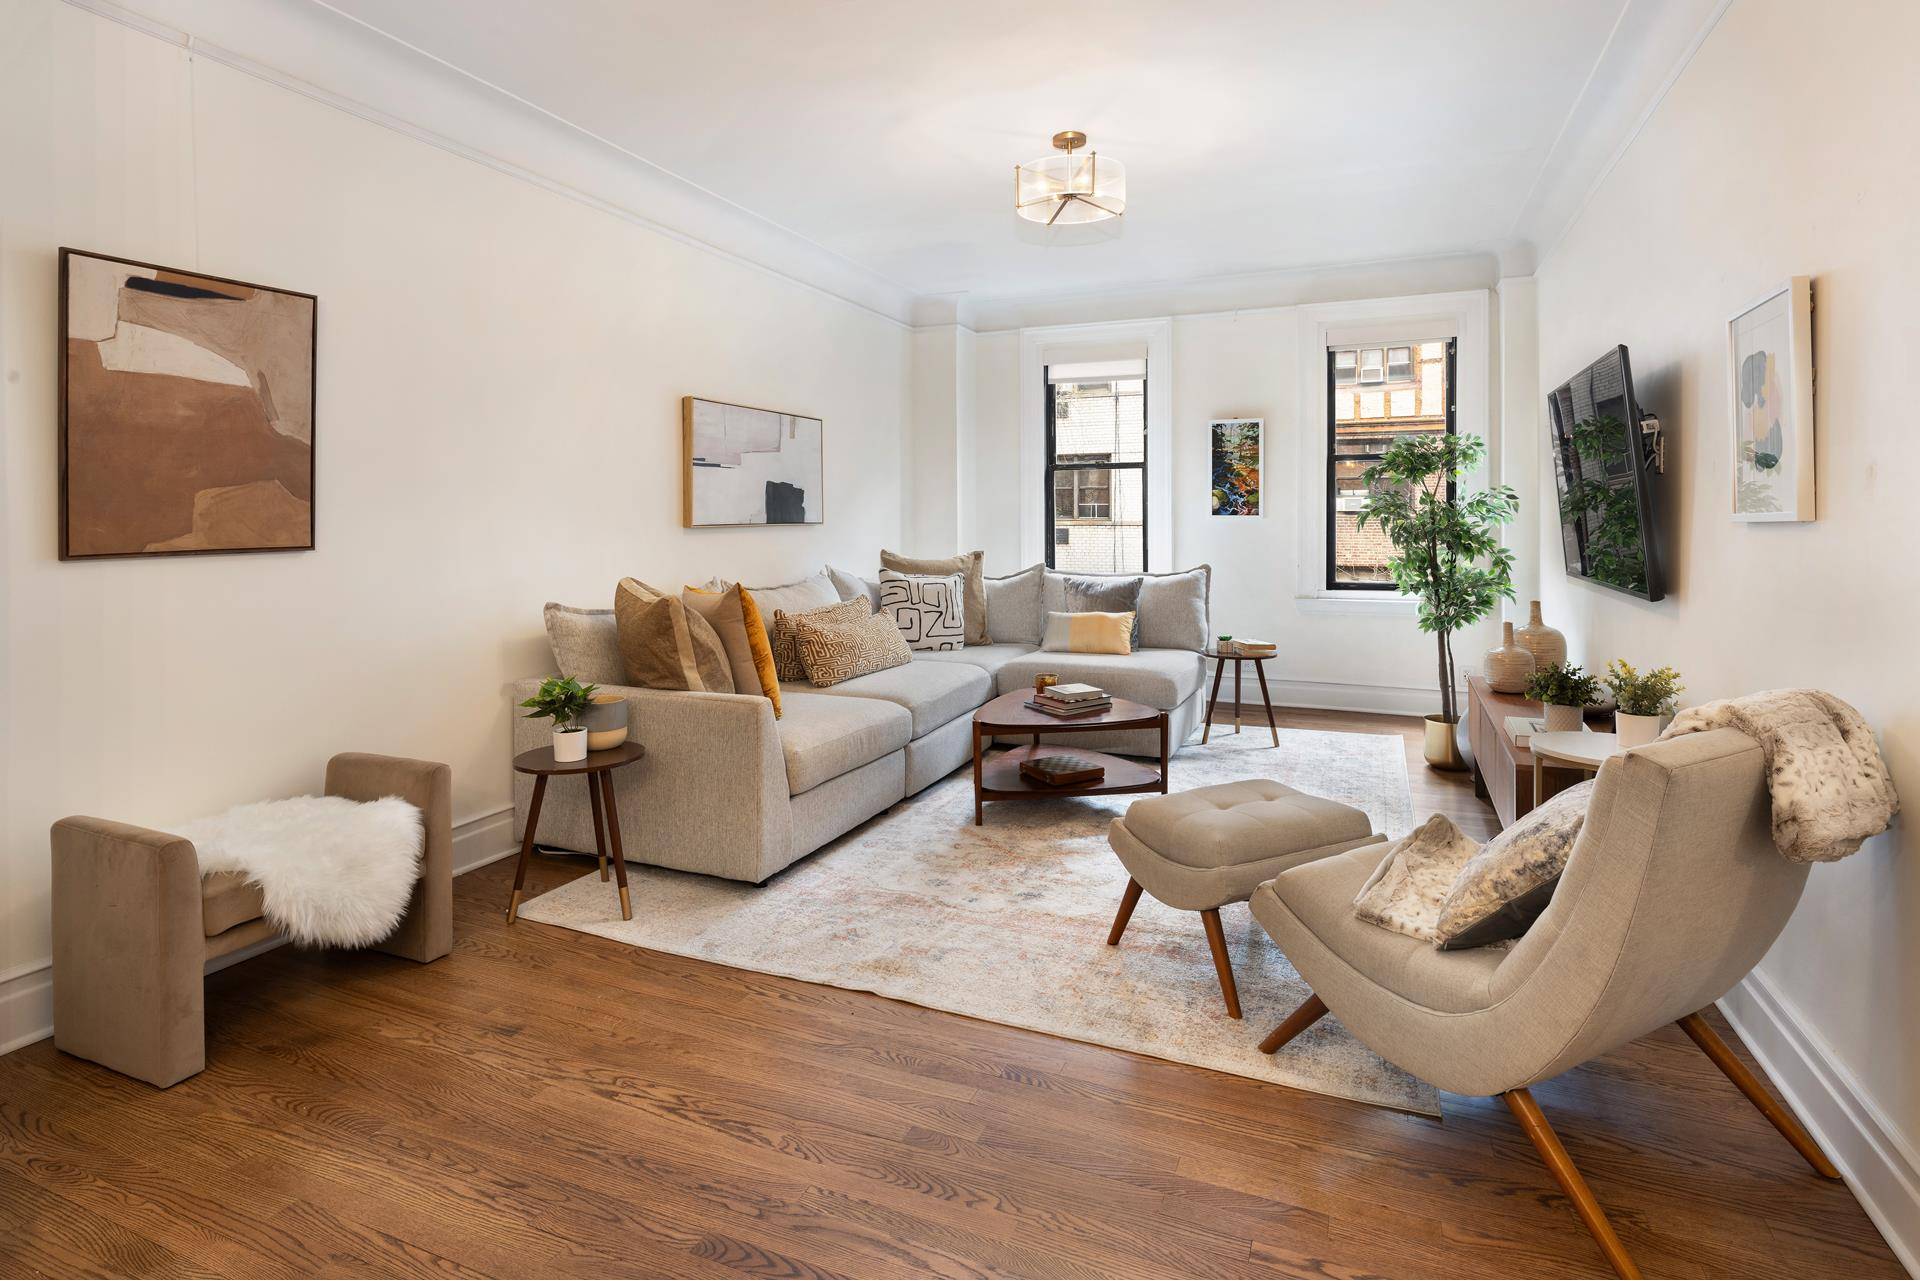 SPACIOUS Prime UWS ! This beautiful, renovated, and roomy corner two bedroom is what you have been waiting for.